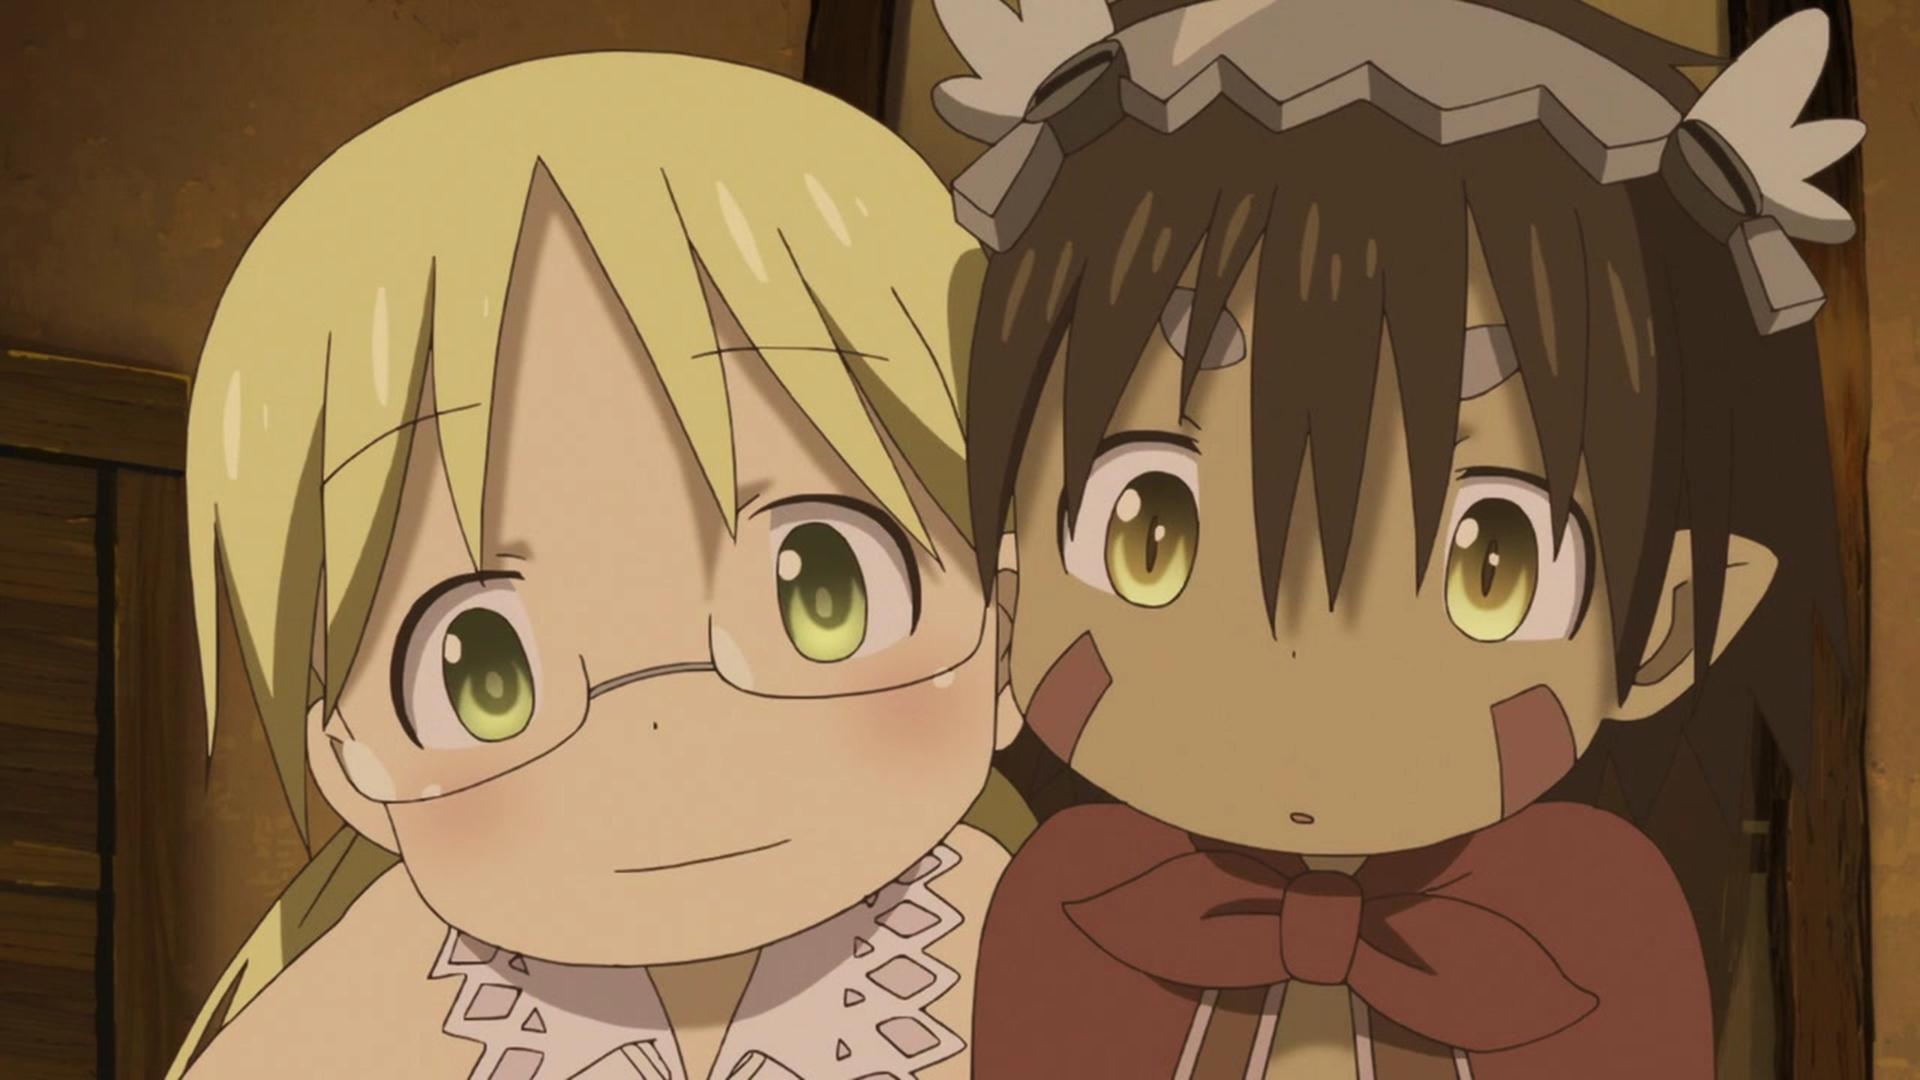 What Is “Made In Abyss” And Why Is It Controversial For K-Pop Idols To Talk  About? - Koreaboo